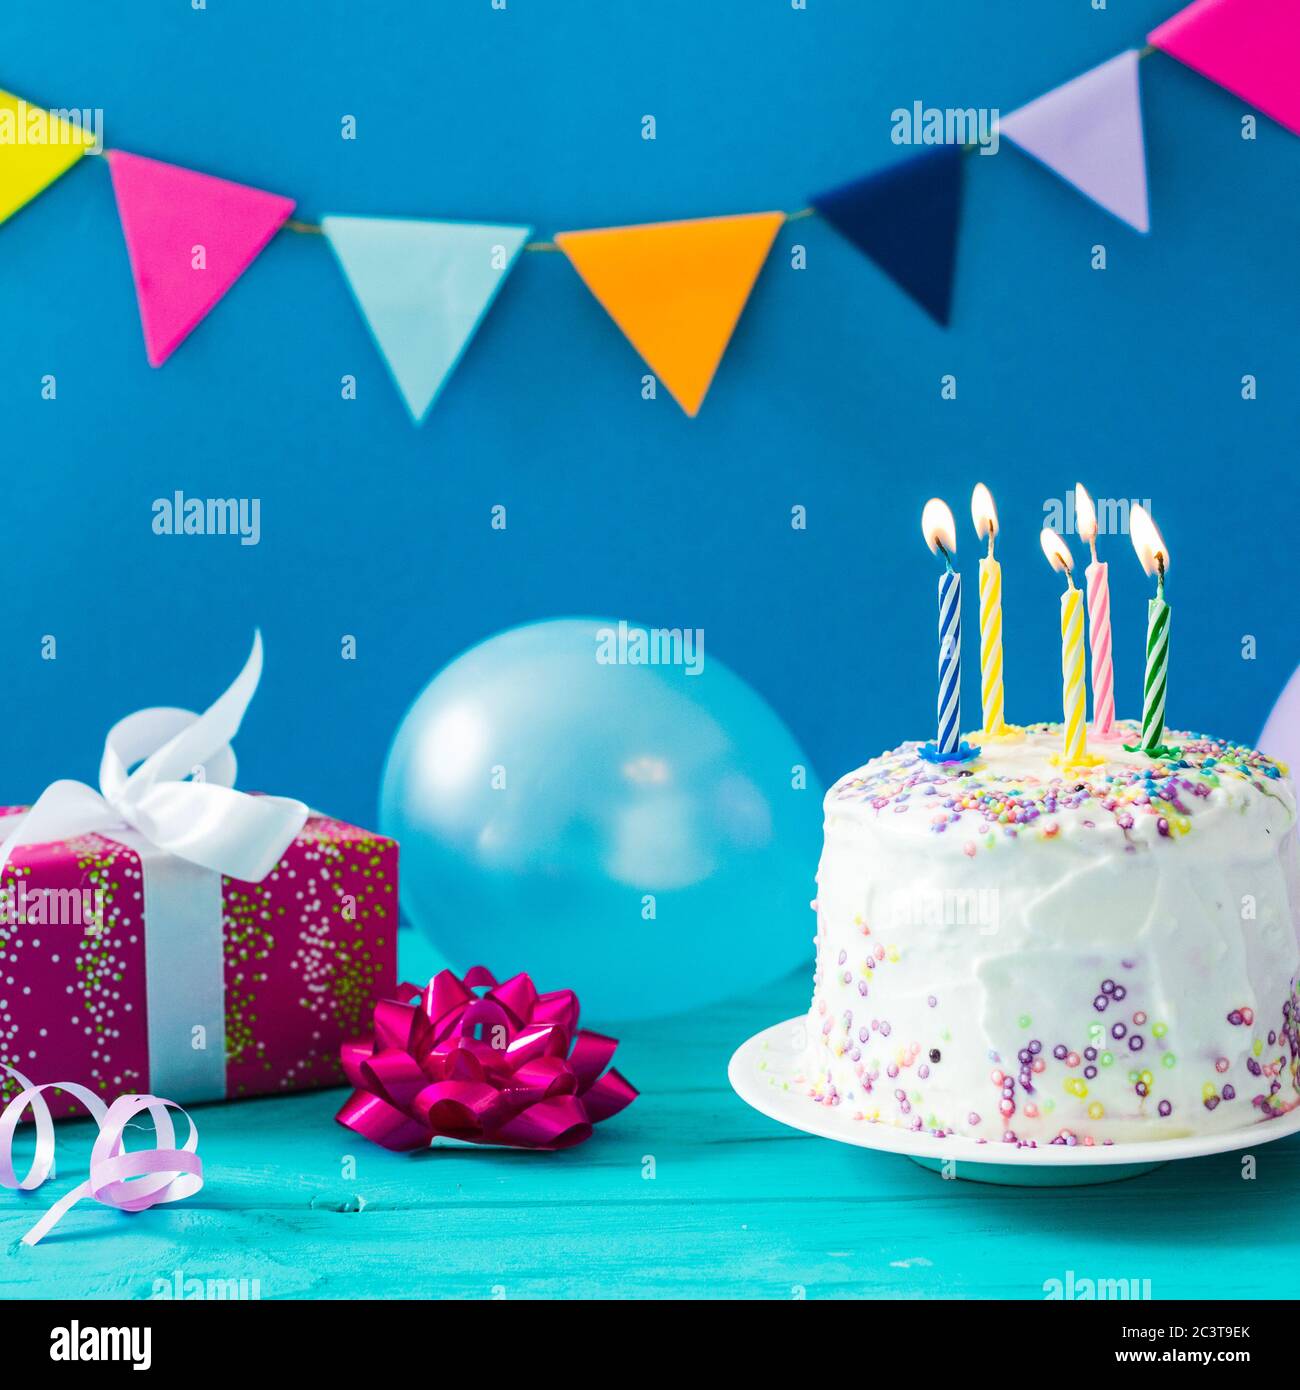 Free and customizable cake background templates